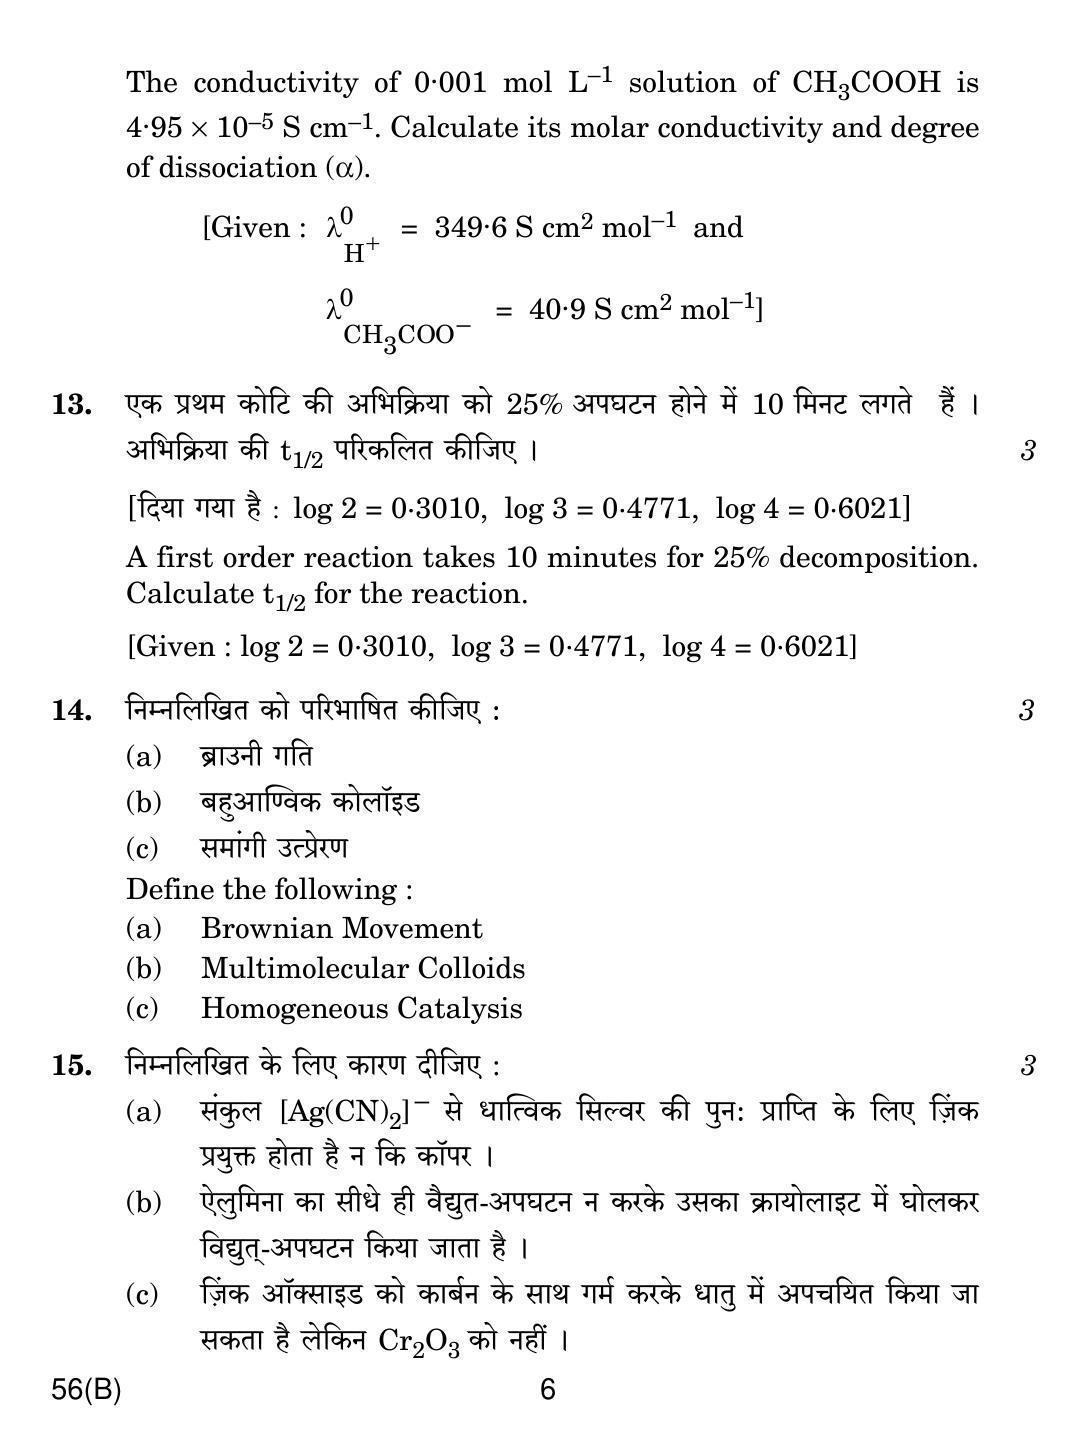 CBSE Class 12 56(B) CHEMISTRY FOR BLIND CANDIDATES 2018 Question Paper - Page 6